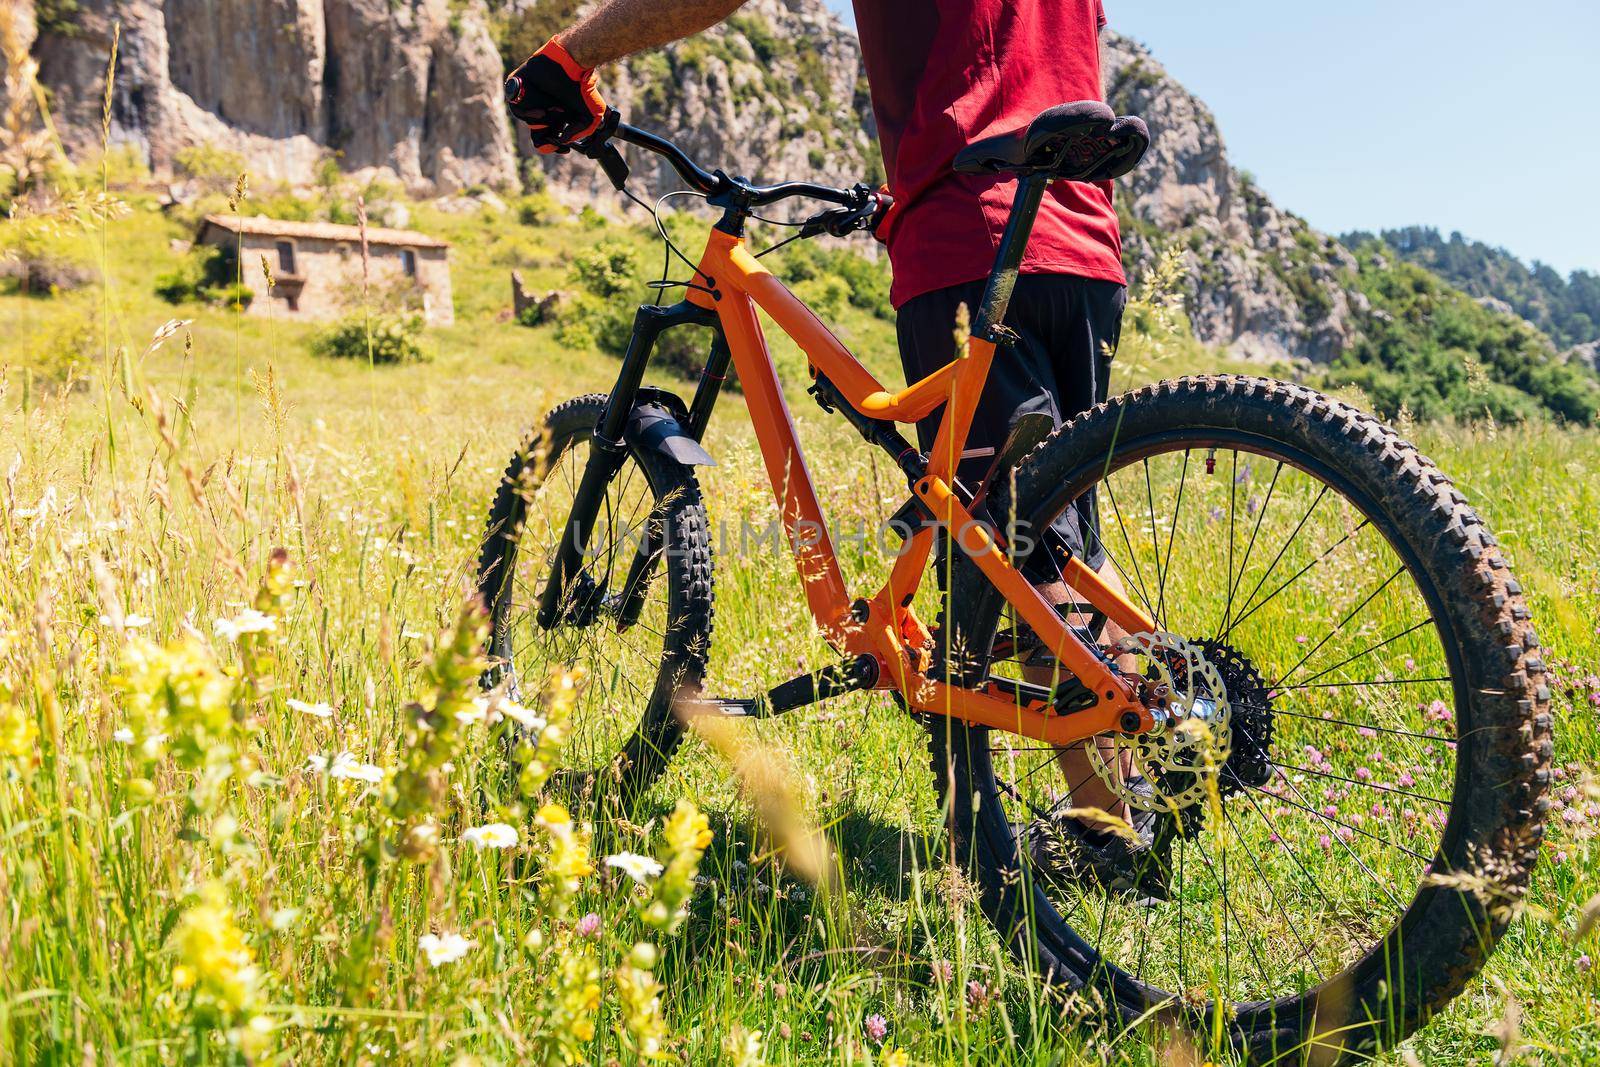 detail the wheels of a mountain bike and the legs of a cyclist walking through a flower meadow, concept of sport and healthy lifestyle in nature